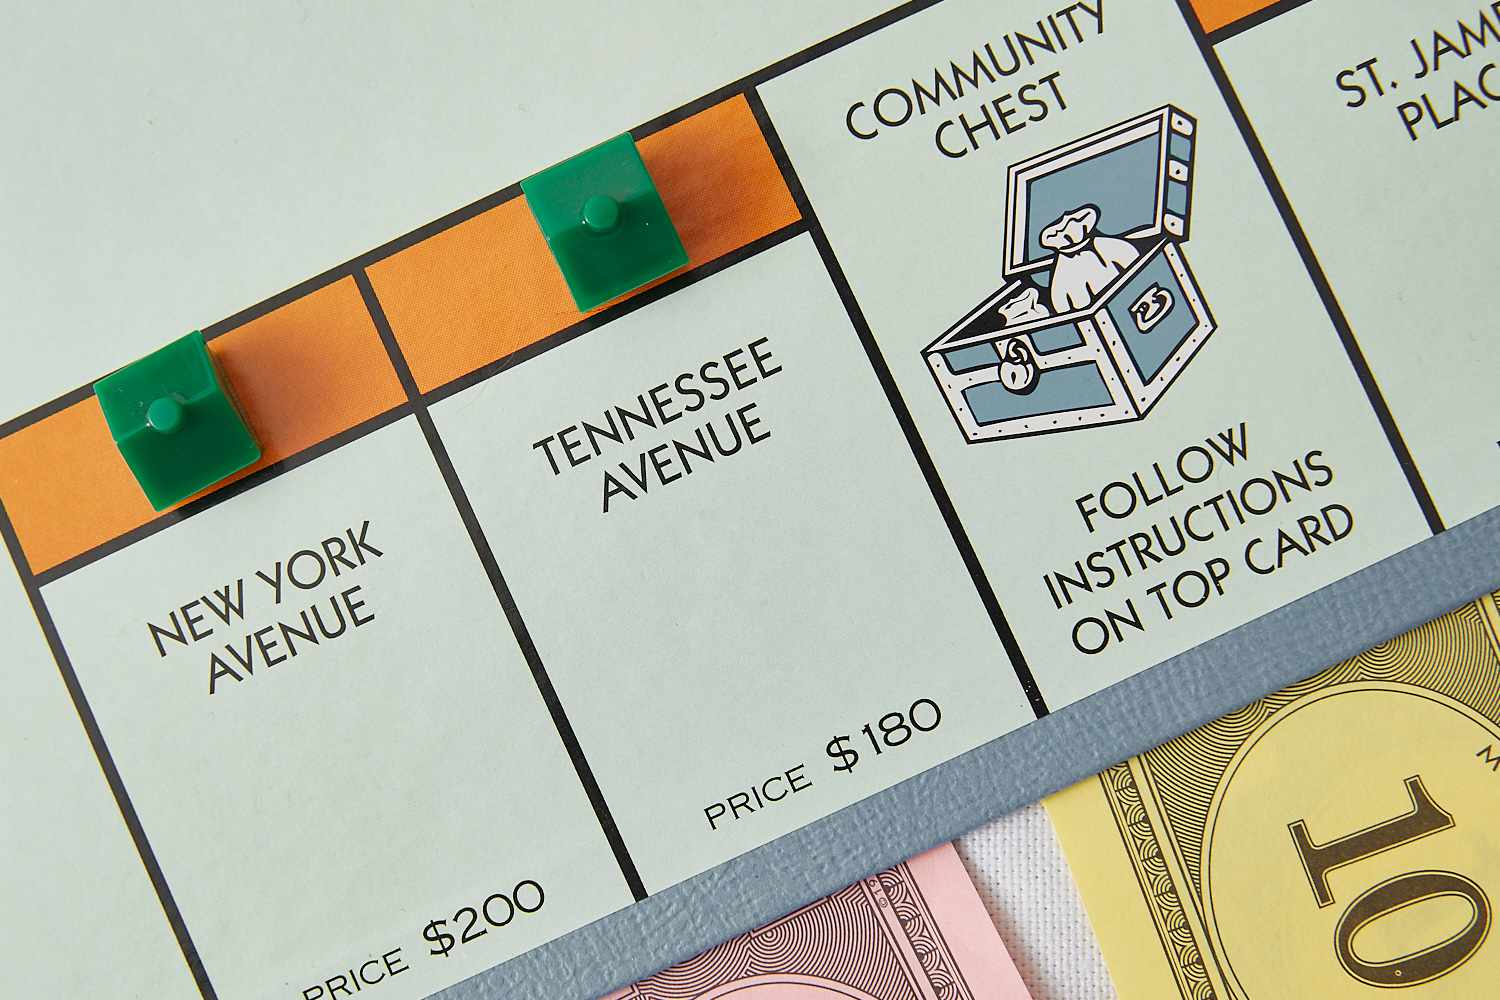 Monopoly Tennessee Avenue